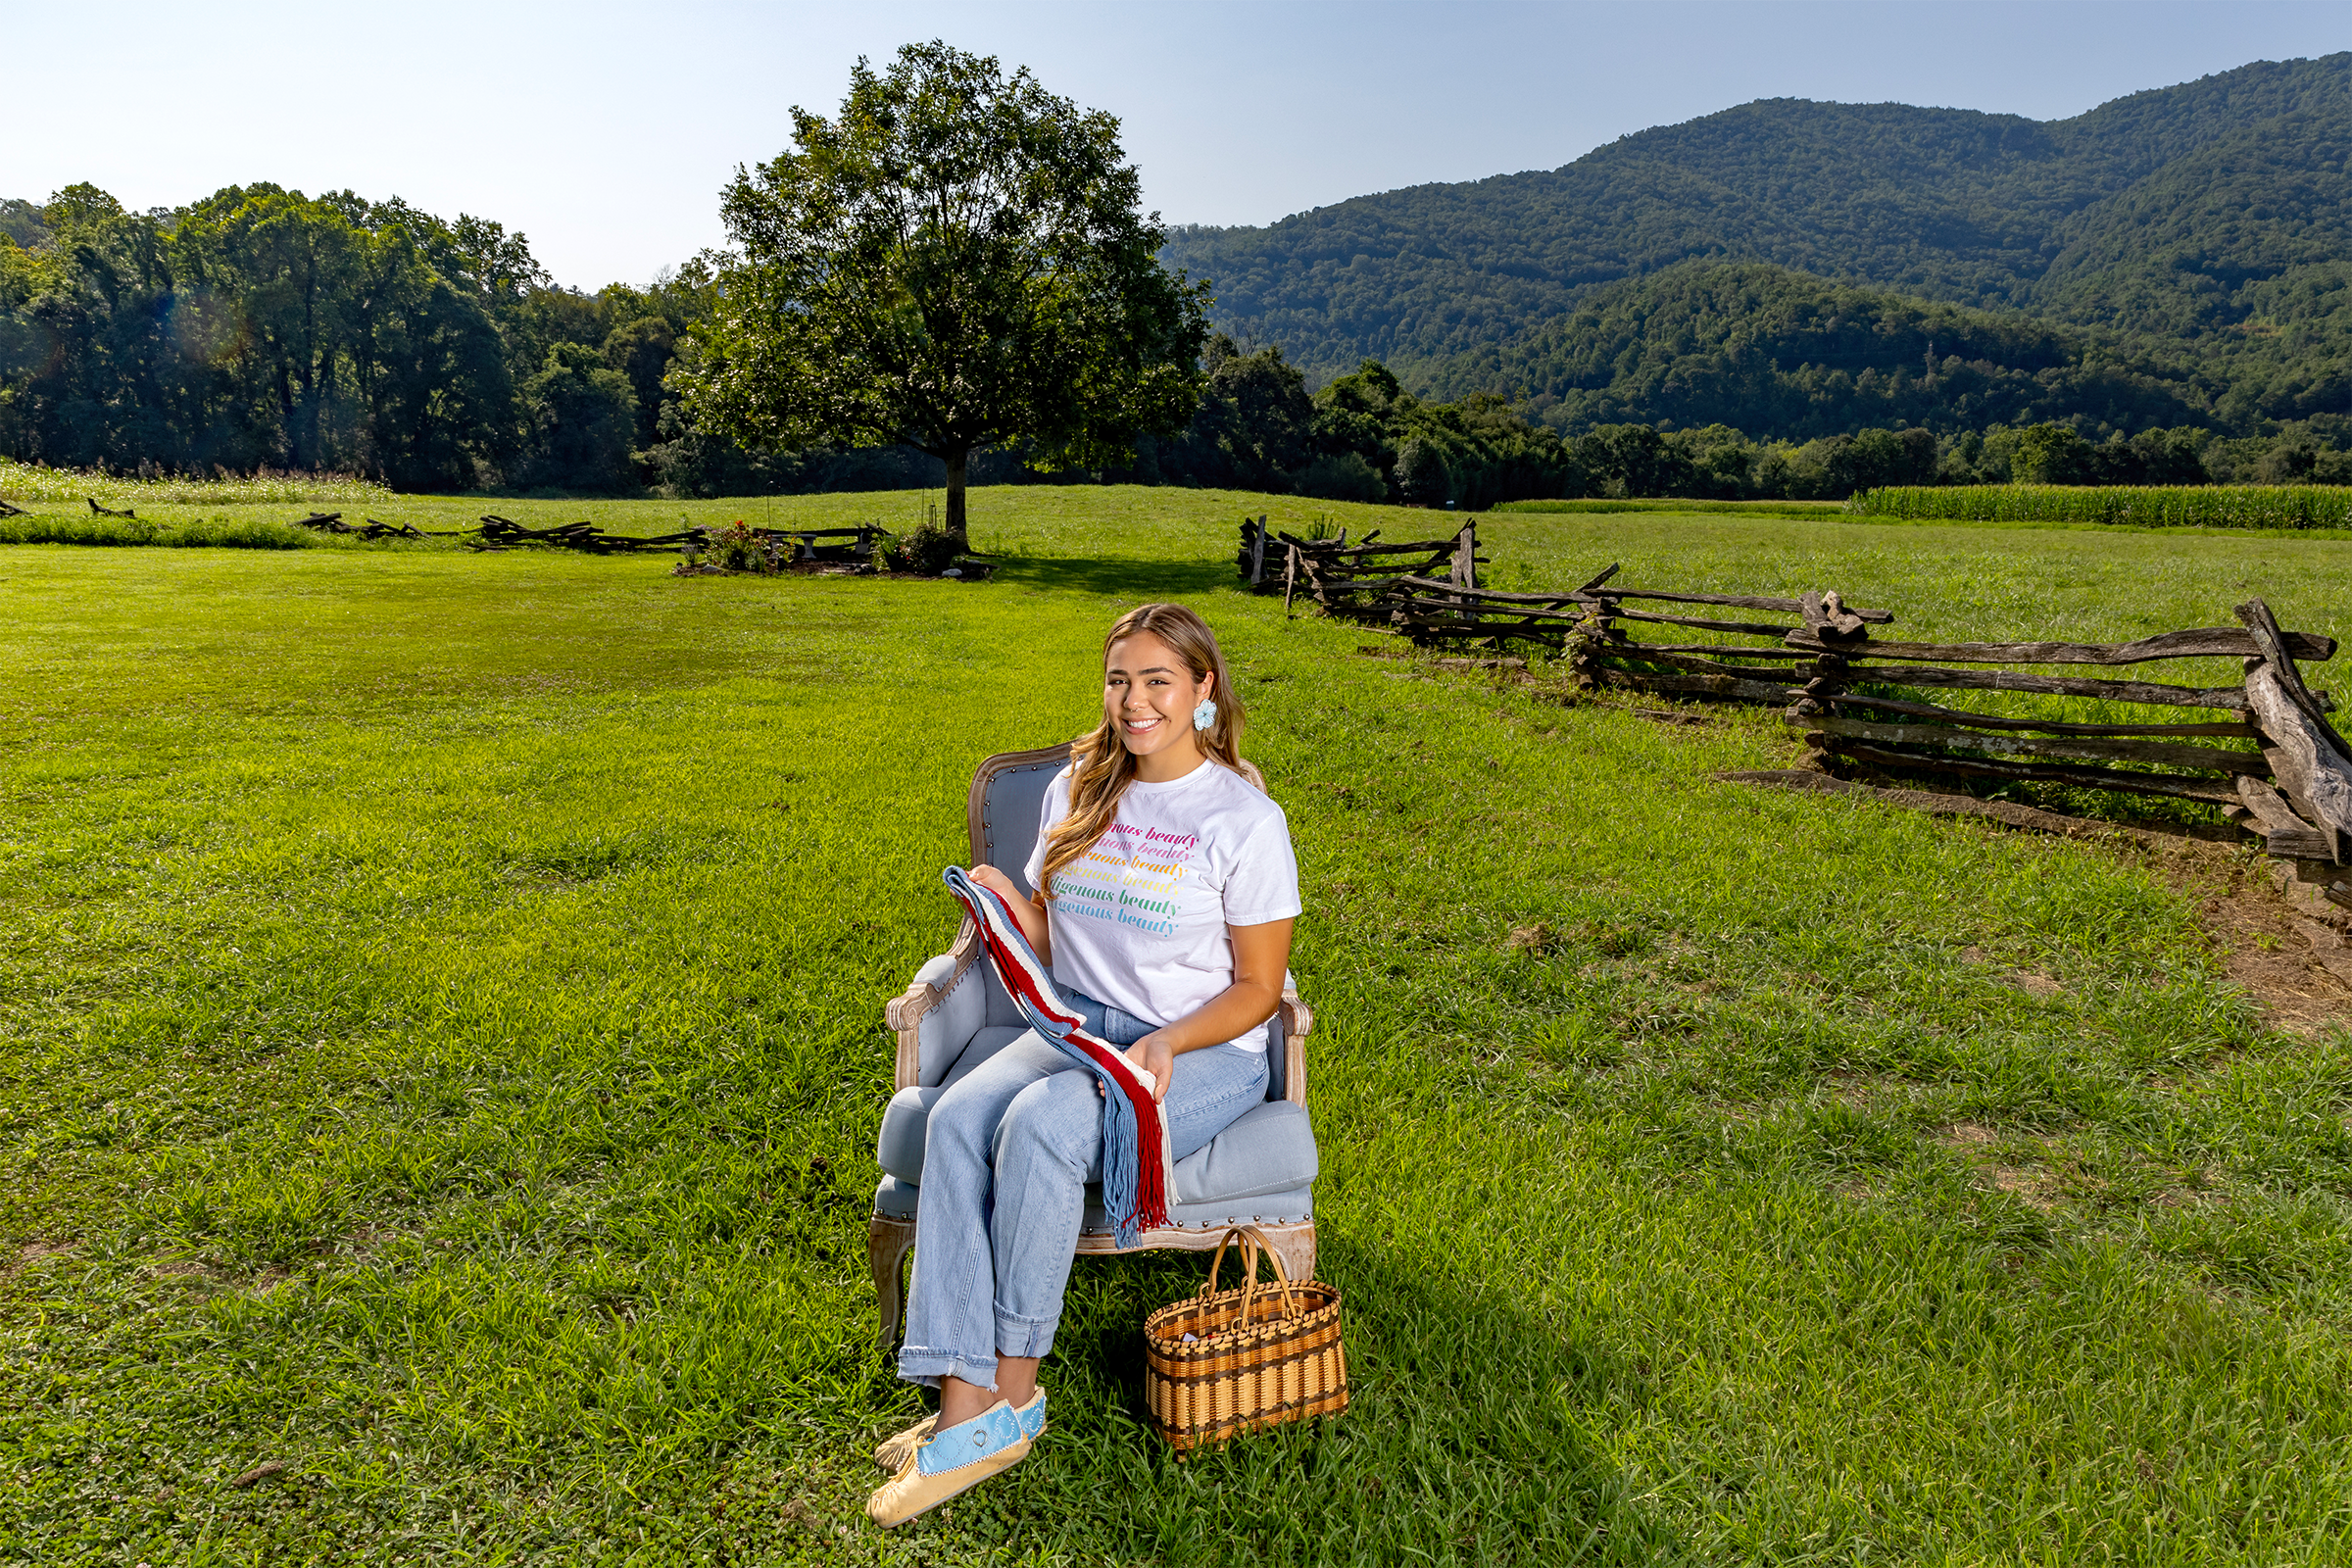 A woman named Tsini McCoy sitting in a blue chair and posing for a portrait in a field on a sacred Cherokee site.